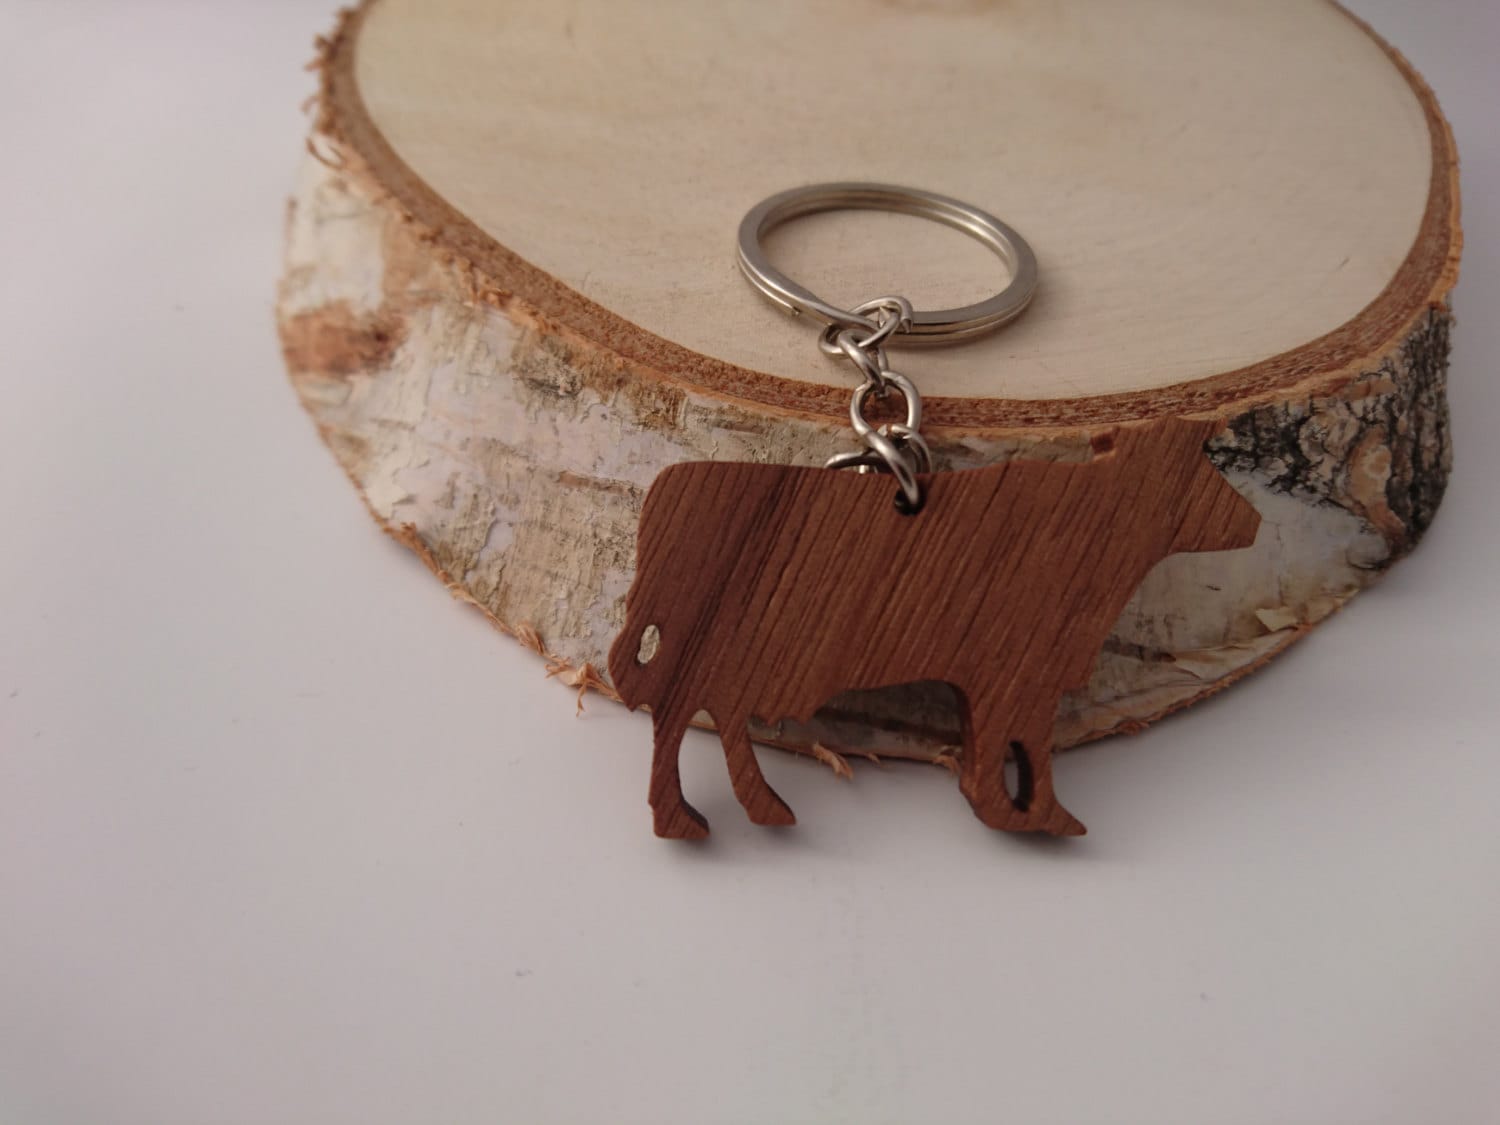 Subtle and Charming Wooden Animal-Shaped Keychain